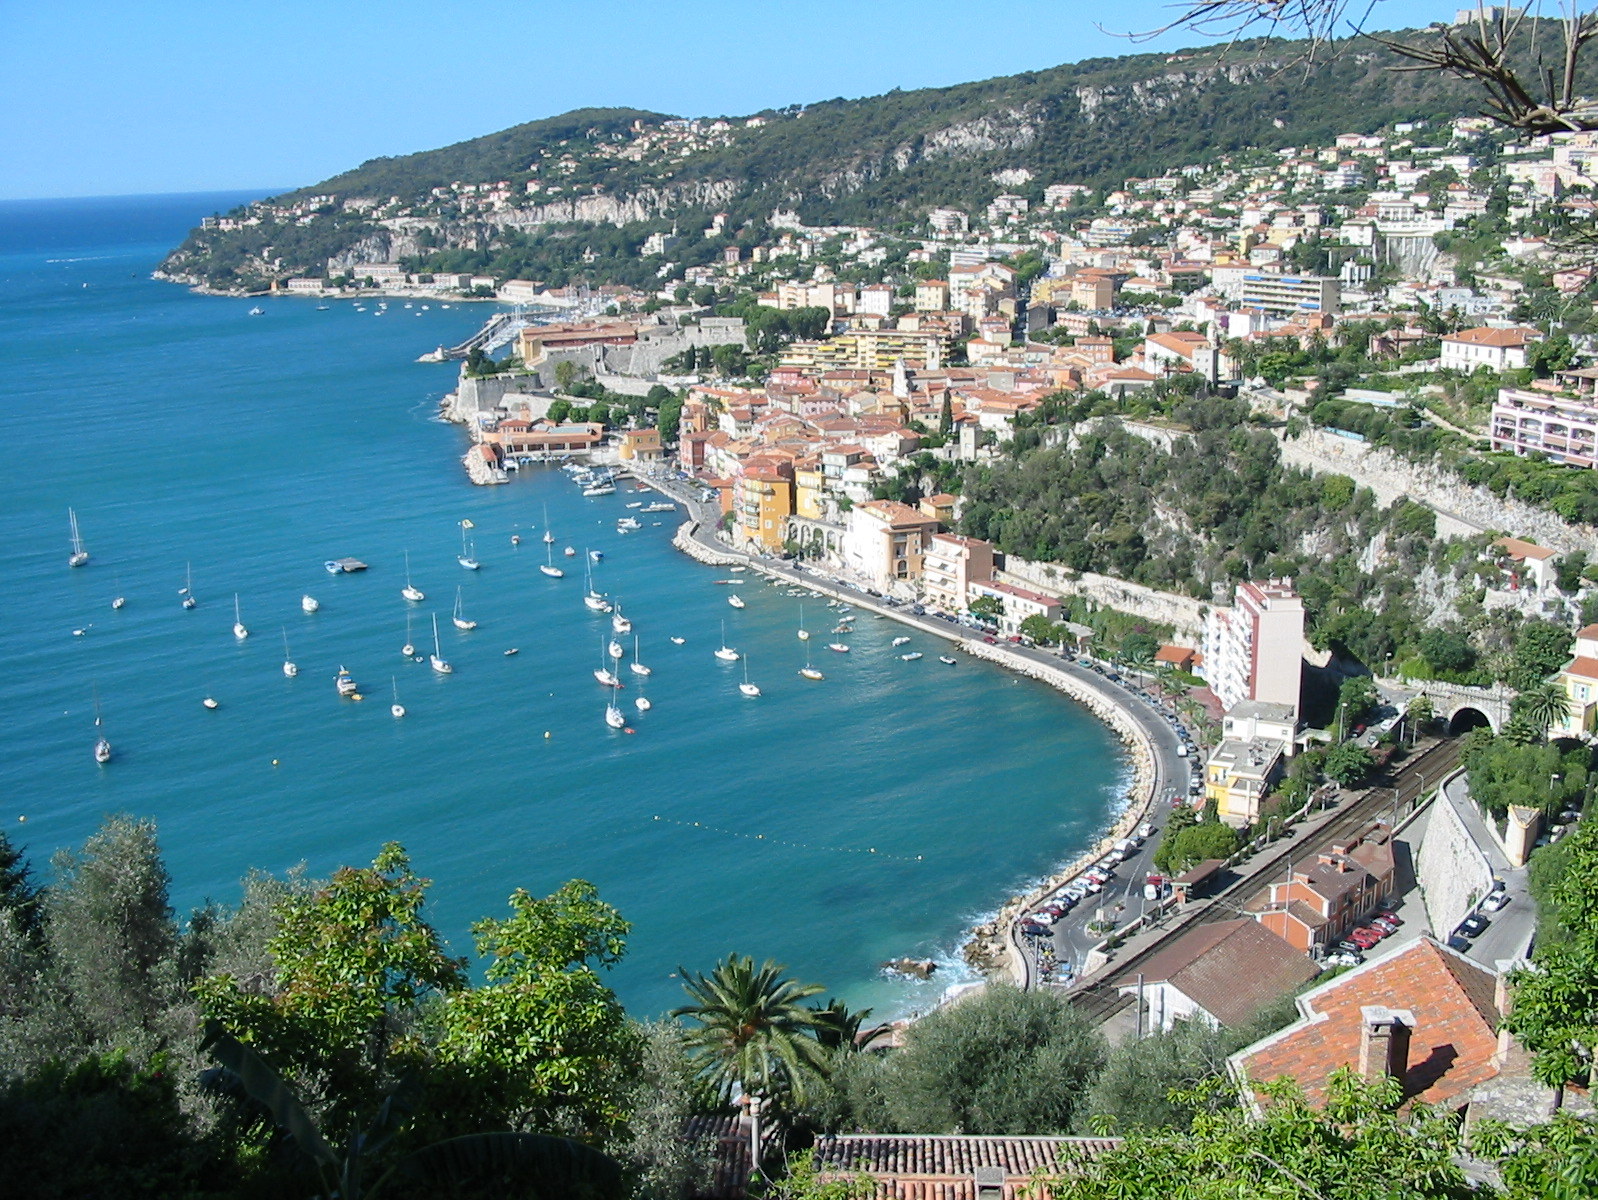 Villefranche-sur-Mer - licence [CC BY-SA 2.0-uk] from Wikimedia Commons